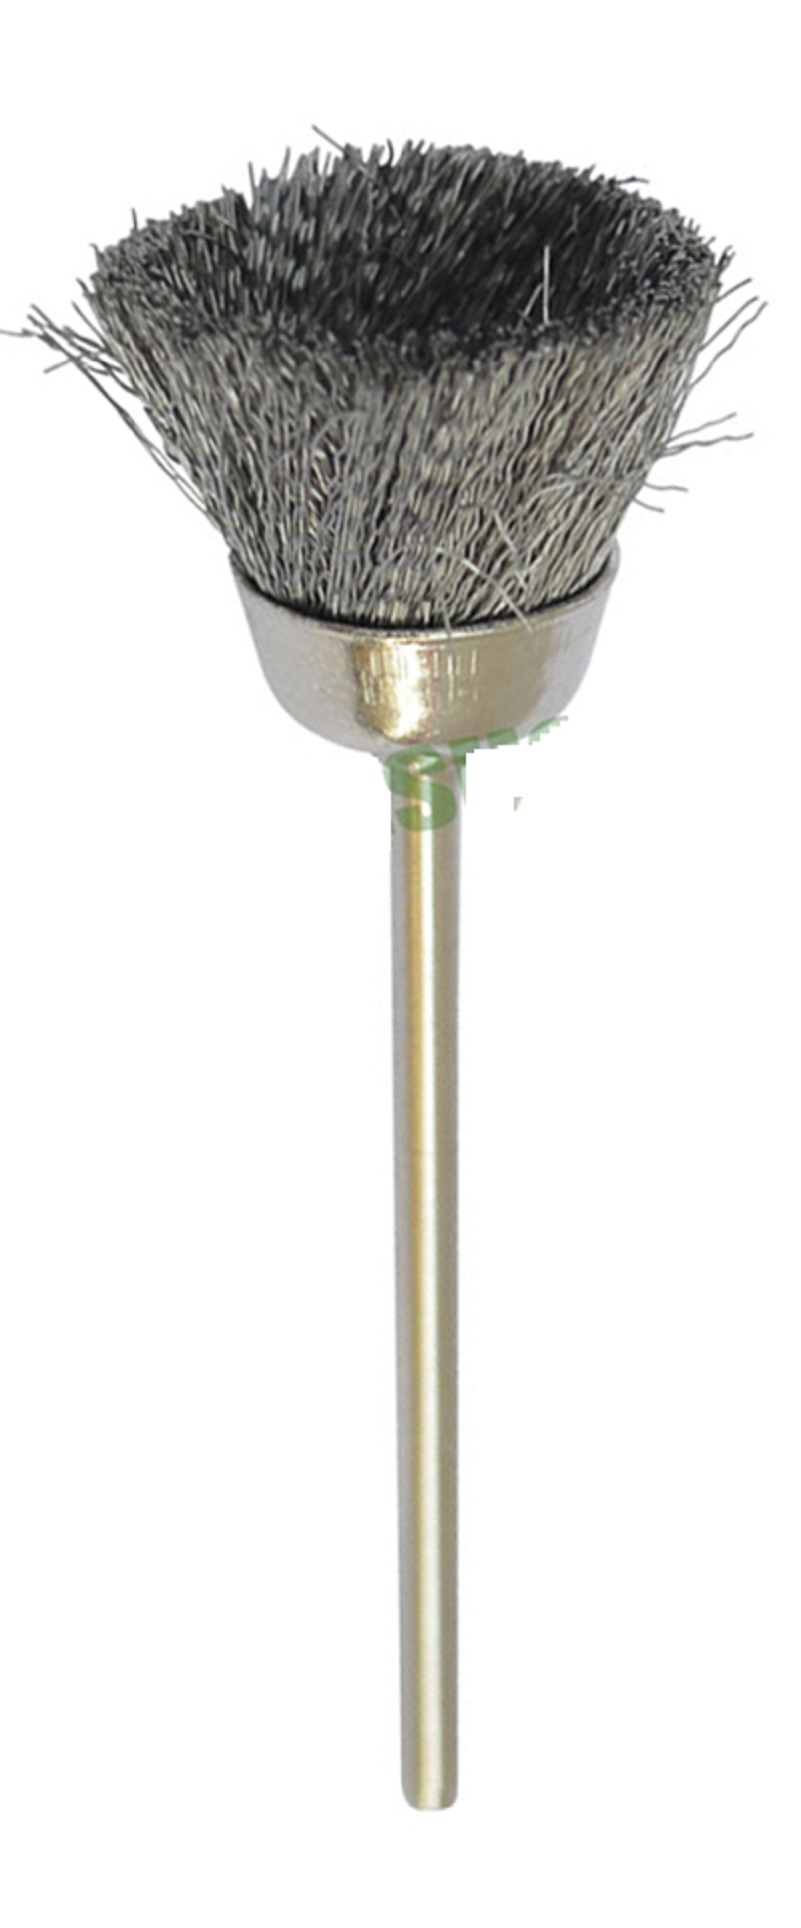 STEEL CUP BRUSHES, MOUNTED on a 3/32" (2.3mm) mandrel , sold in packs of 12